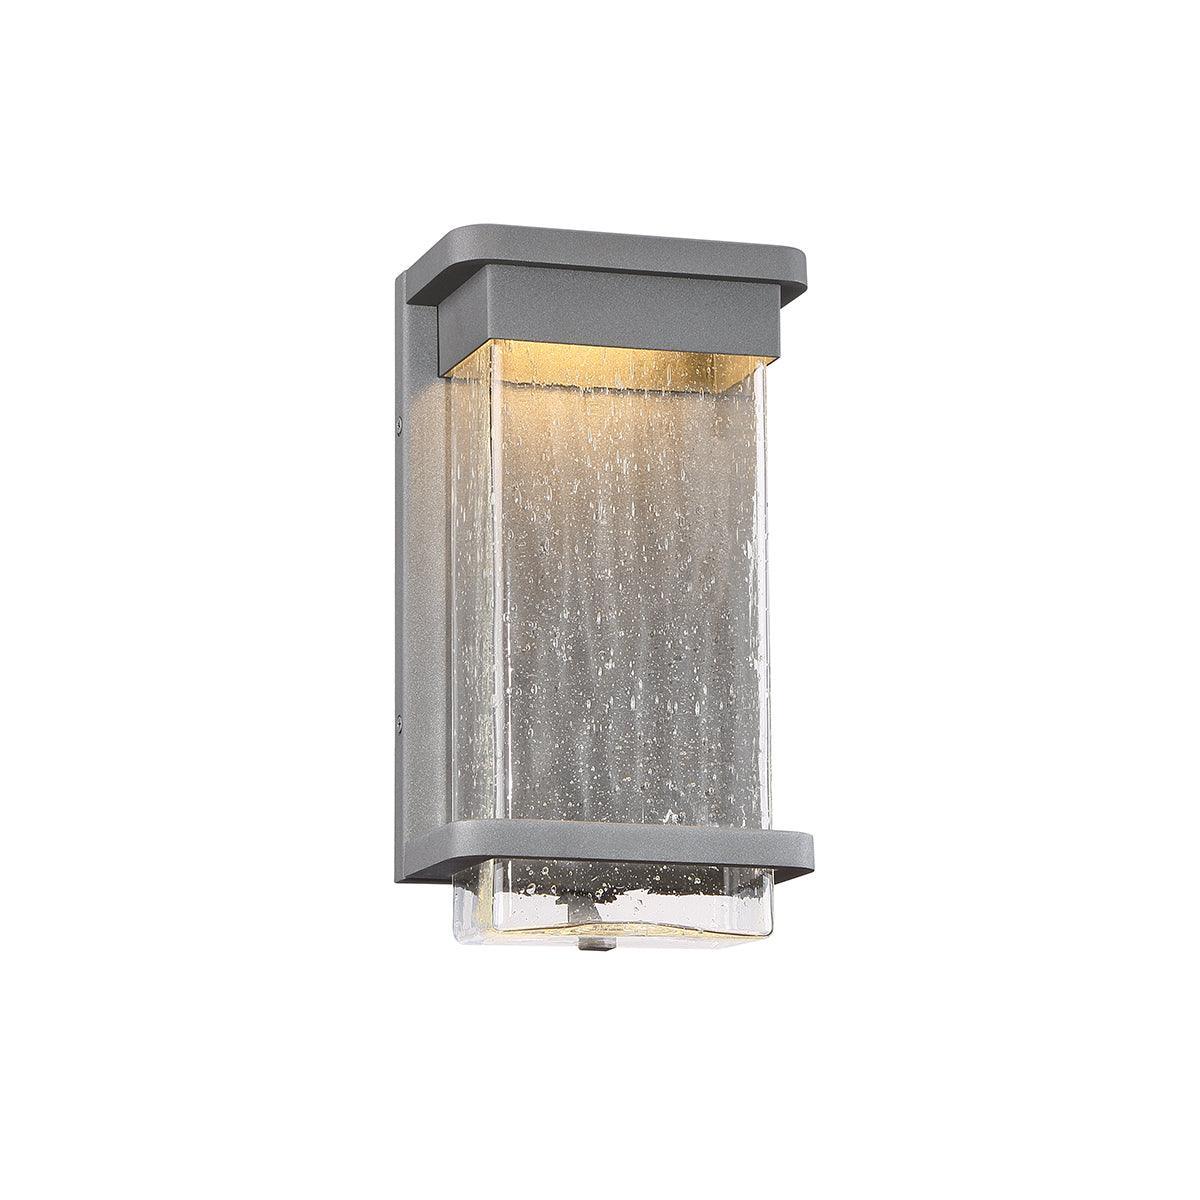 Modern Forms - Vitrine LED Outdoor Wall Mount - WS-W32512-GH | Montreal Lighting & Hardware